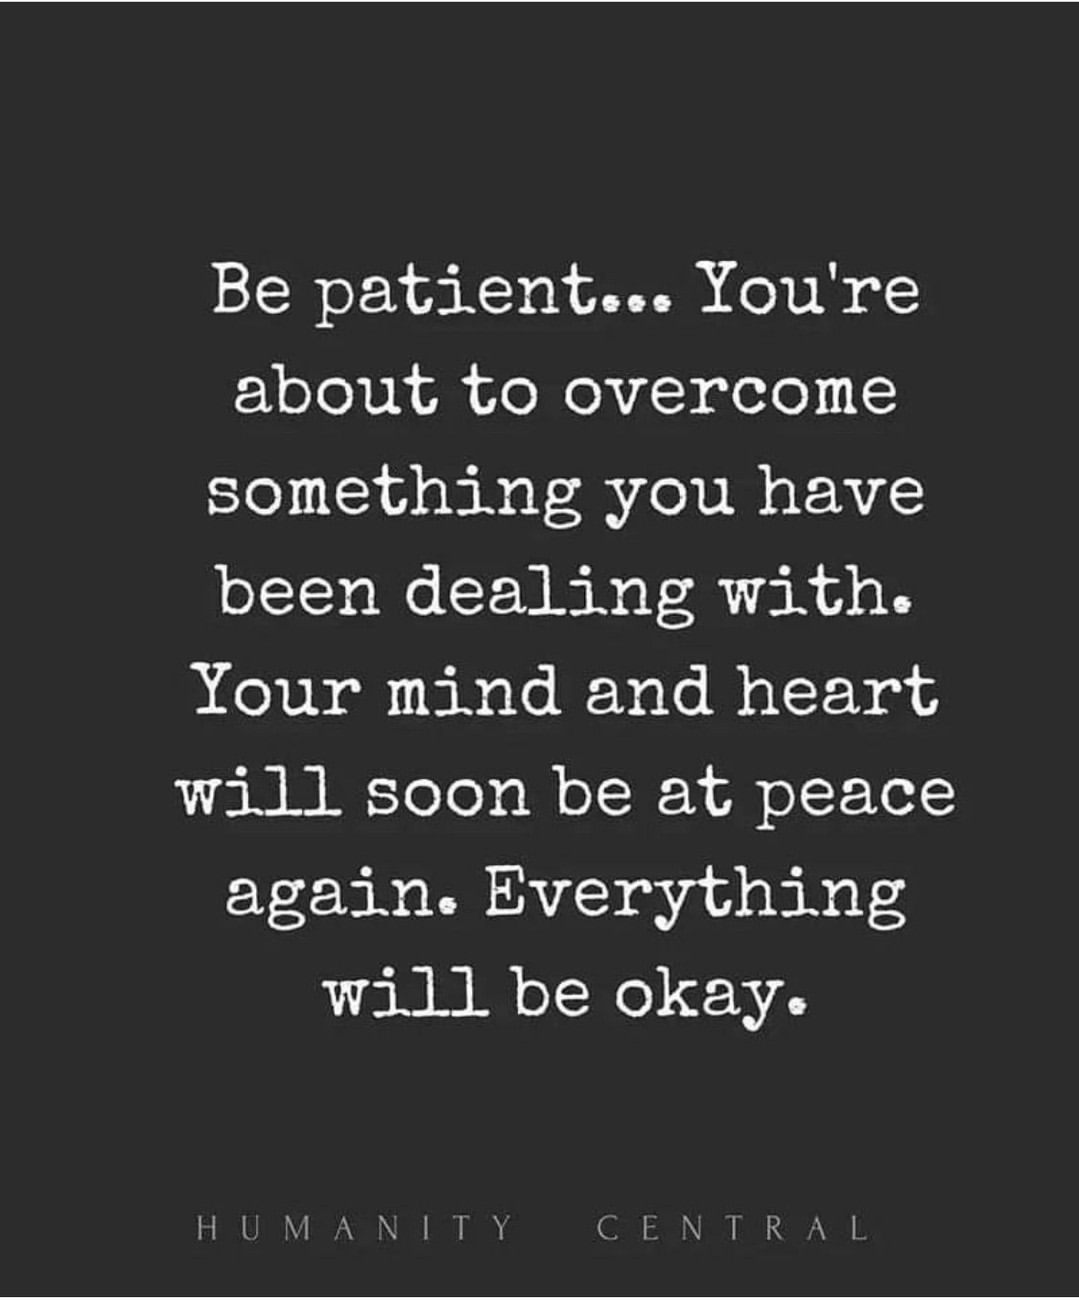 Be patient... You're about to overcome something you have been dealing with. Your mind and heart will soon be at peace again. Everything will be okay.